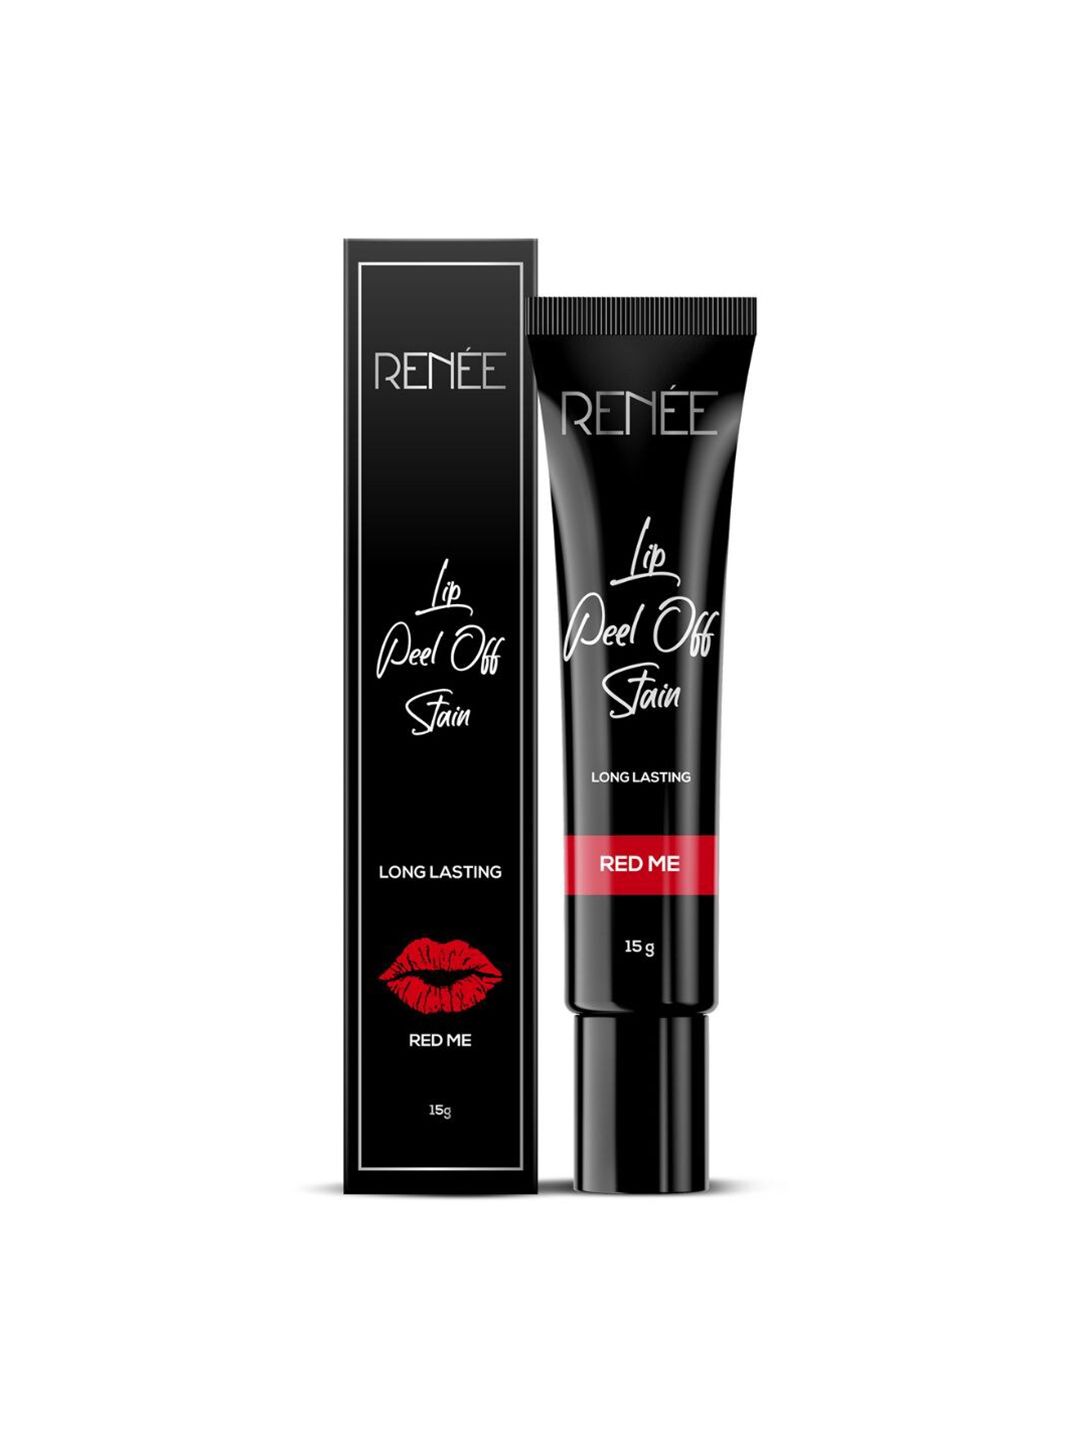 RENEE Lip Peel Off Stain Lipstick - Red Me 15g Price in India